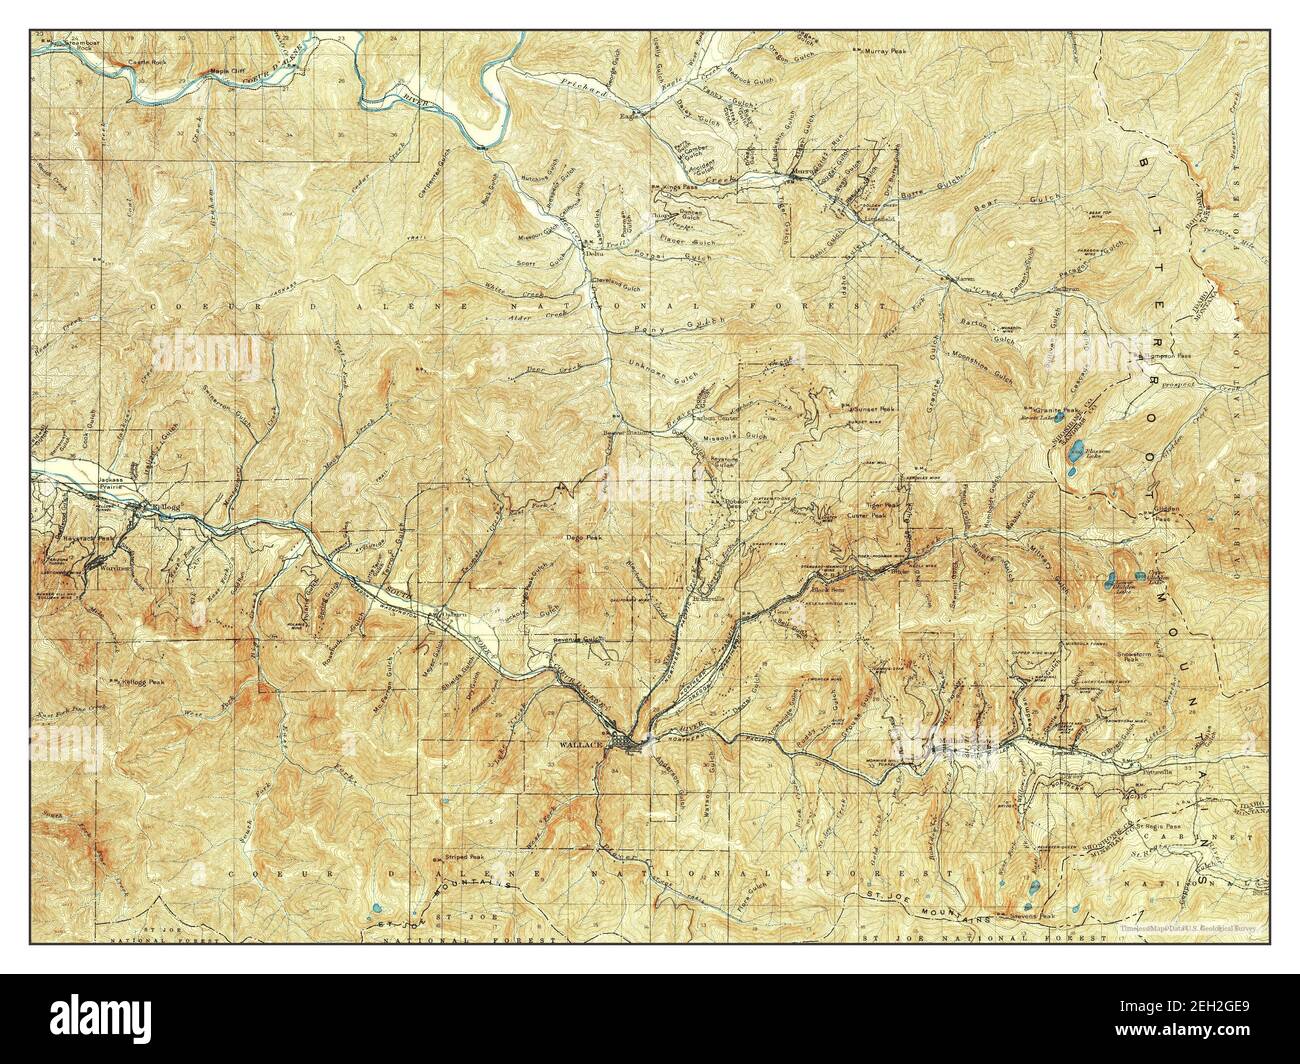 Coeur DAlene District, Idaho, map 1901, 1:62500, United States of America by Timeless Maps, data U.S. Geological Survey Stock Photo